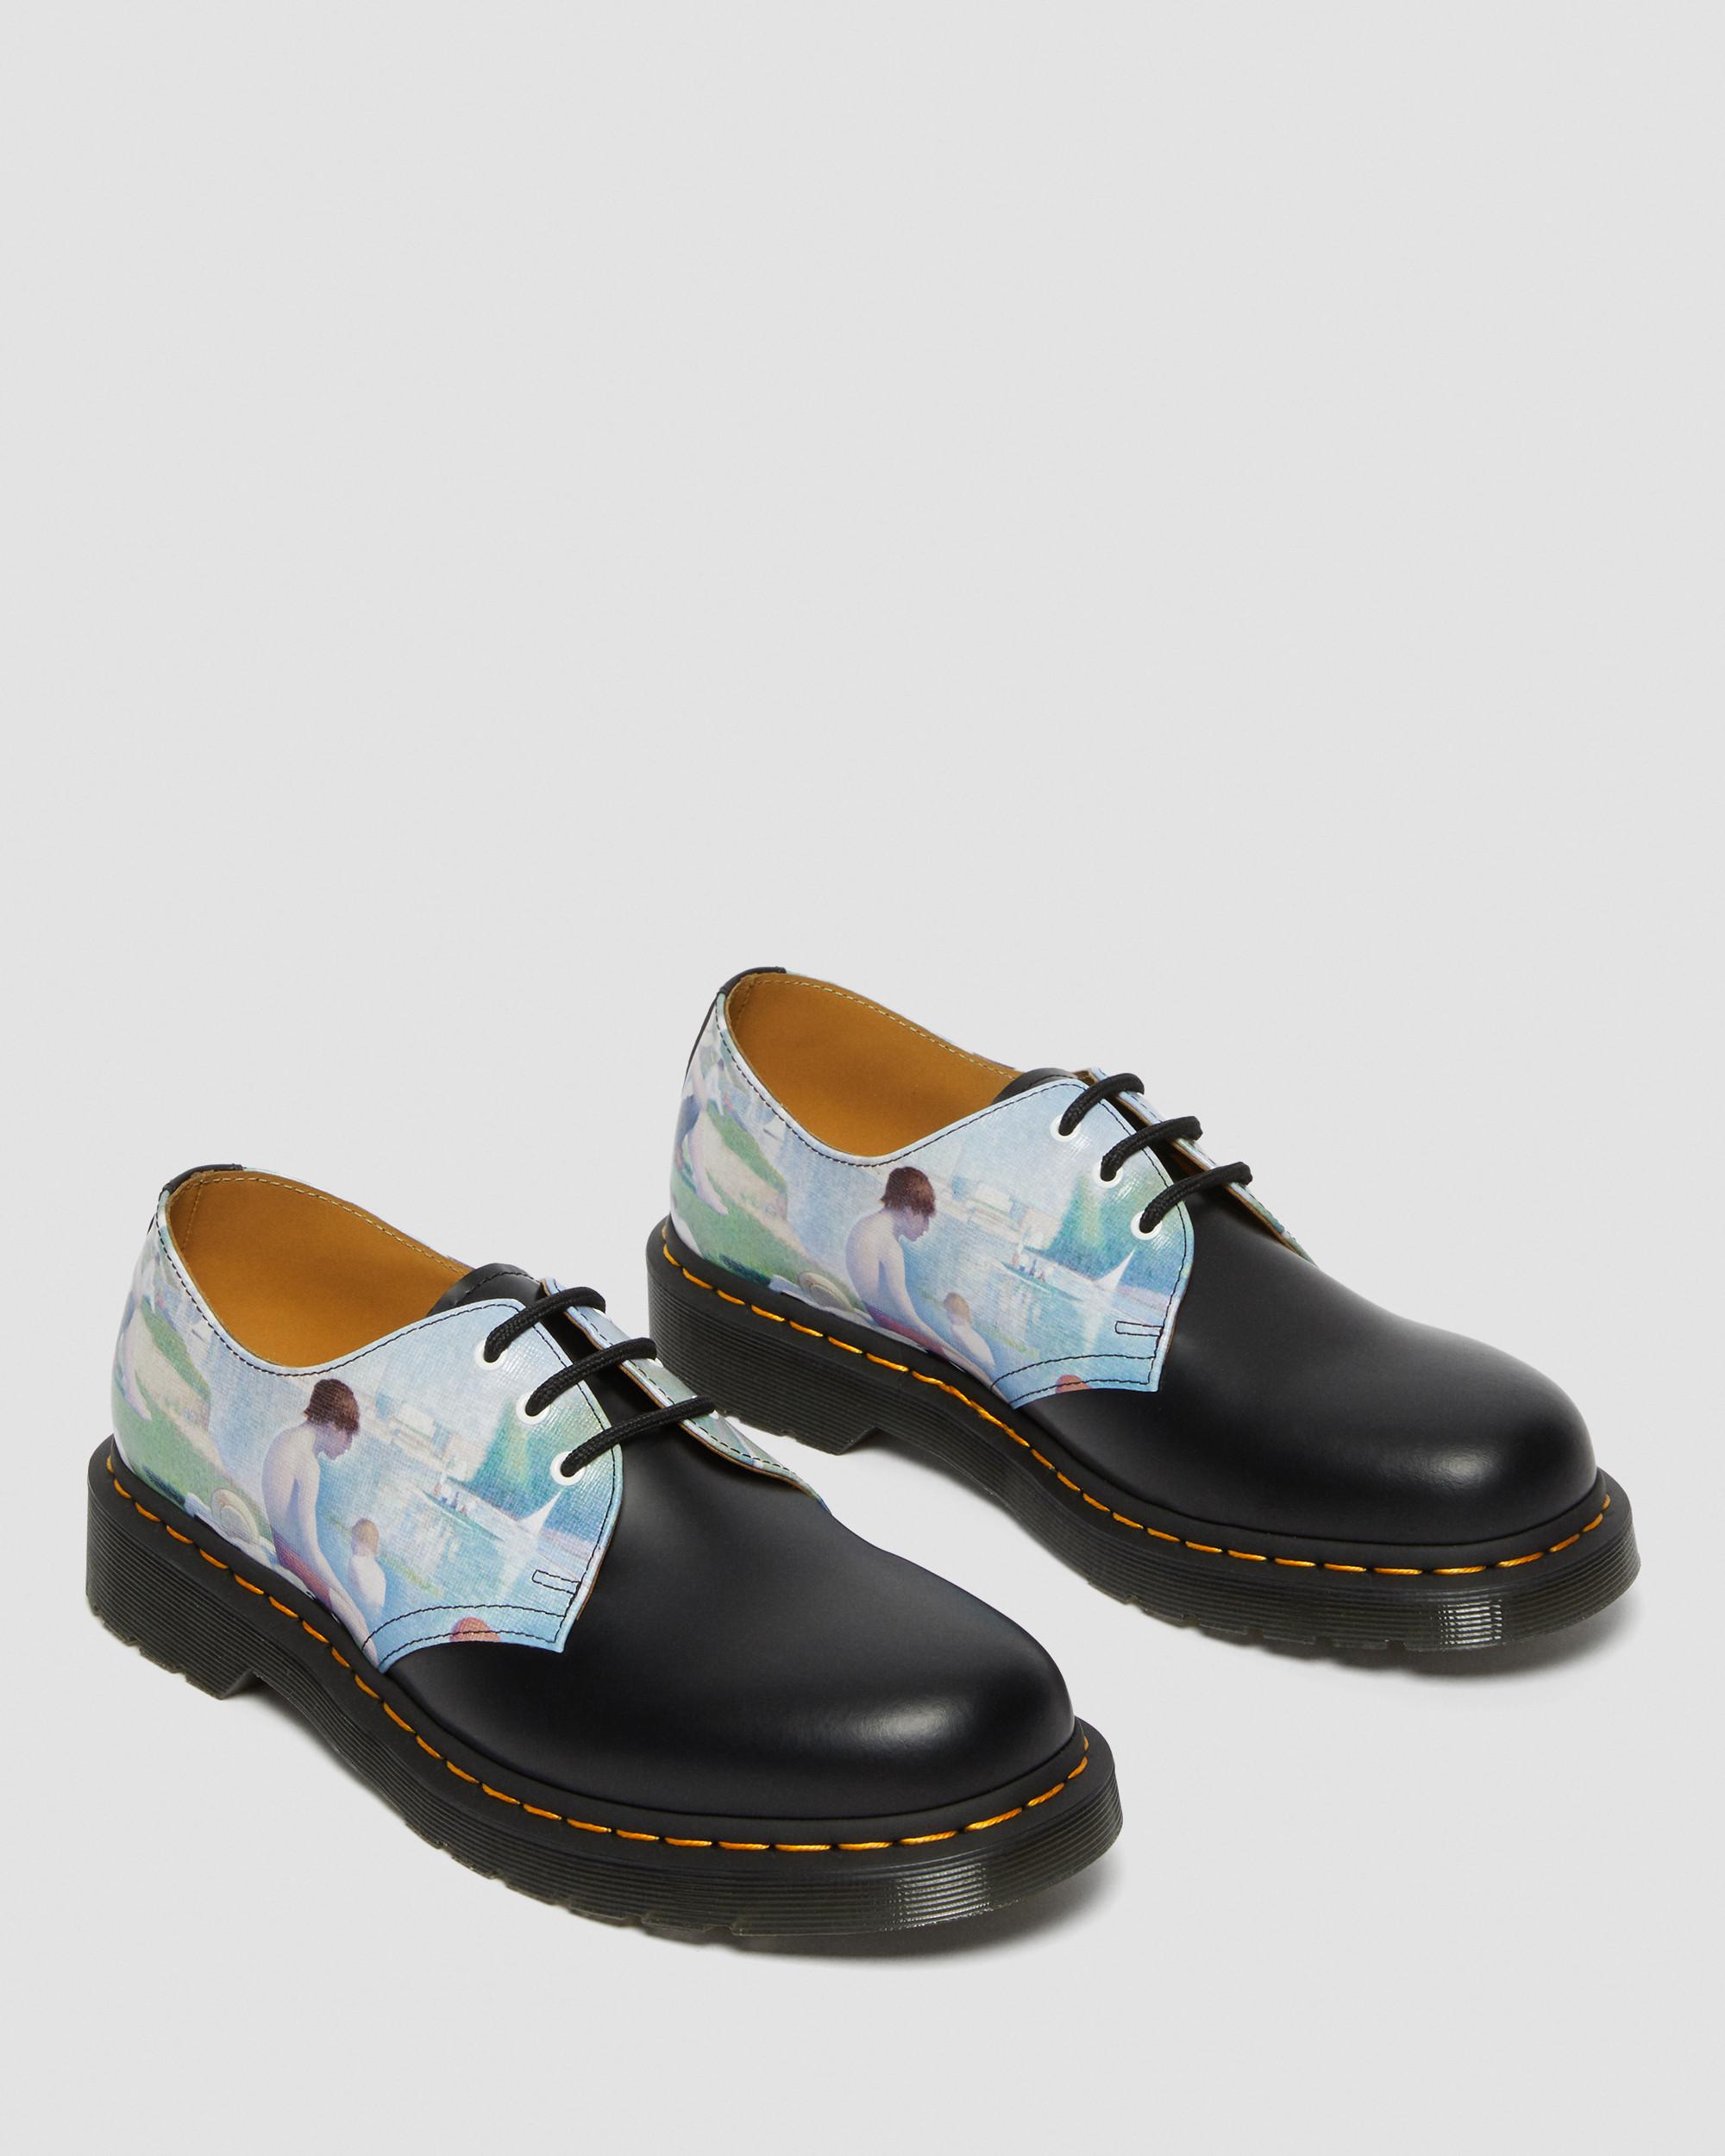 1461 The National Gallery Seurat Oxford Shoes in Black | Dr. Martens